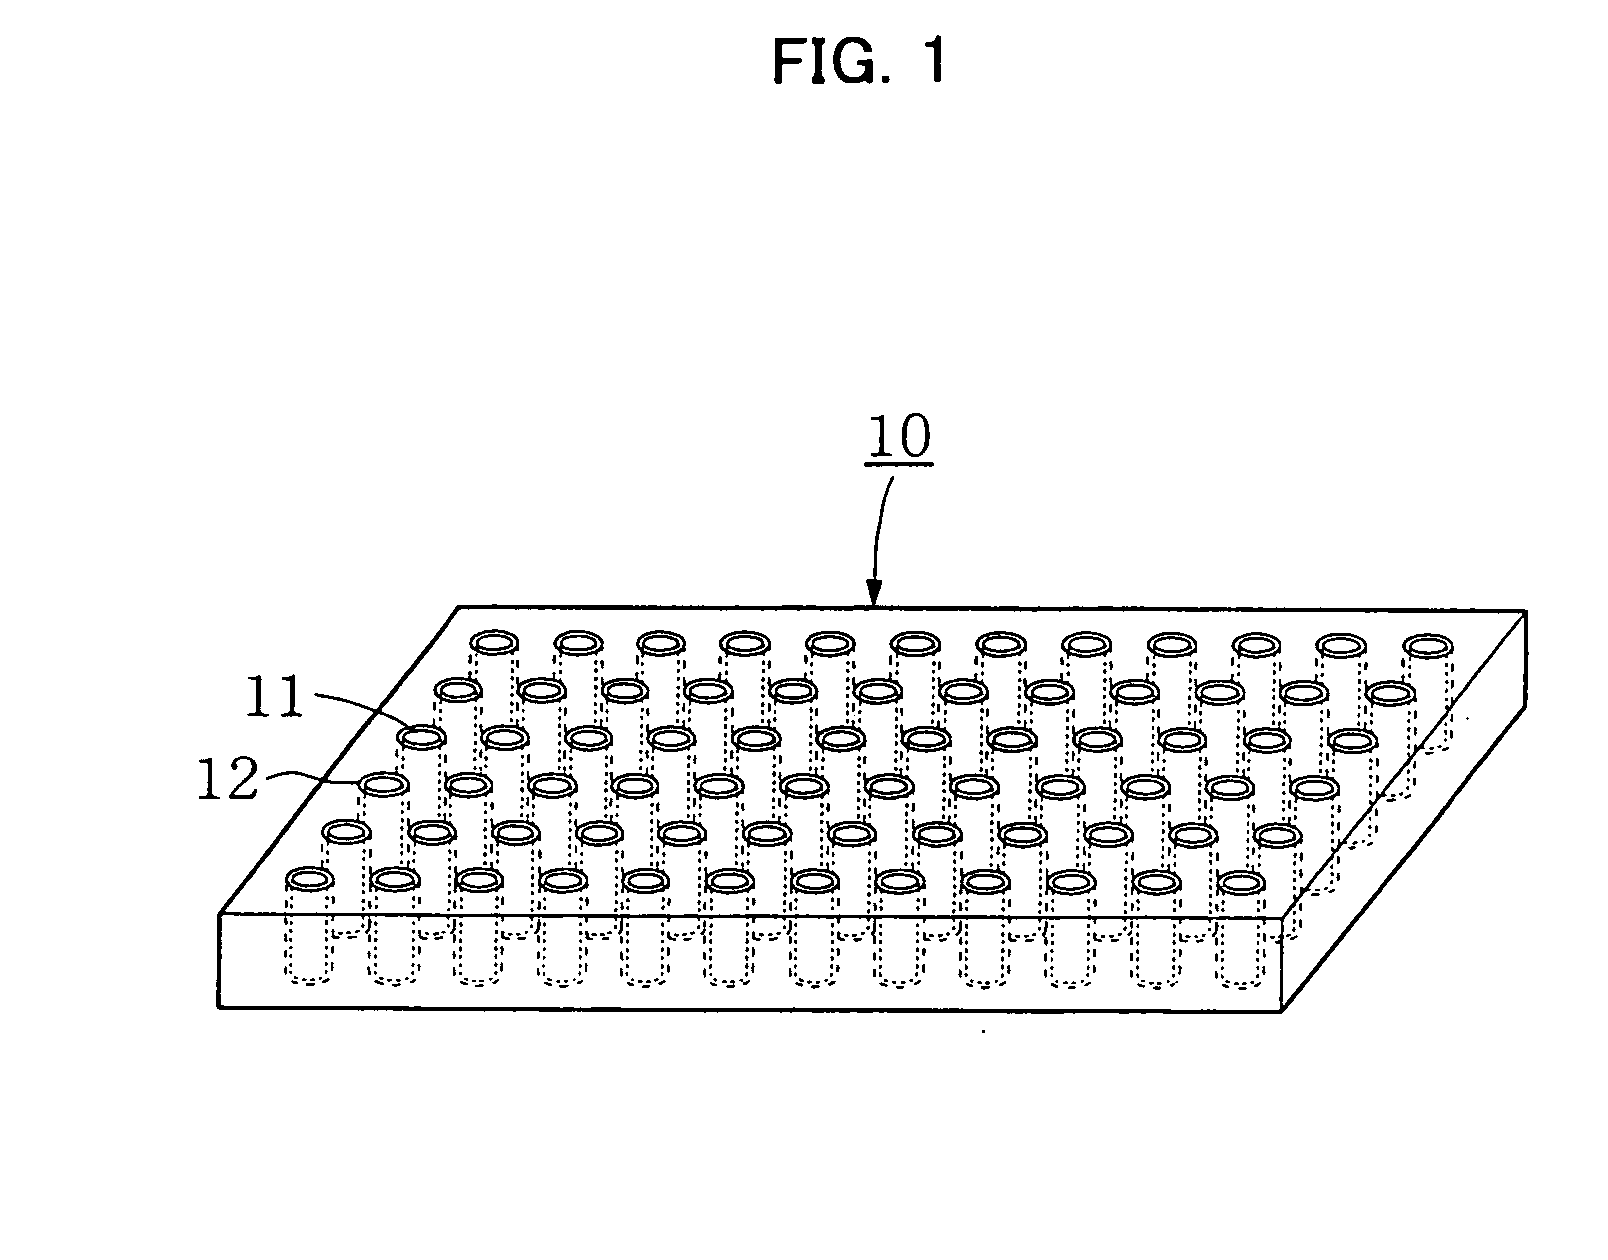 Array for crystallizing protein, device for crystallizing protein and method of screening protein crystallization using the same